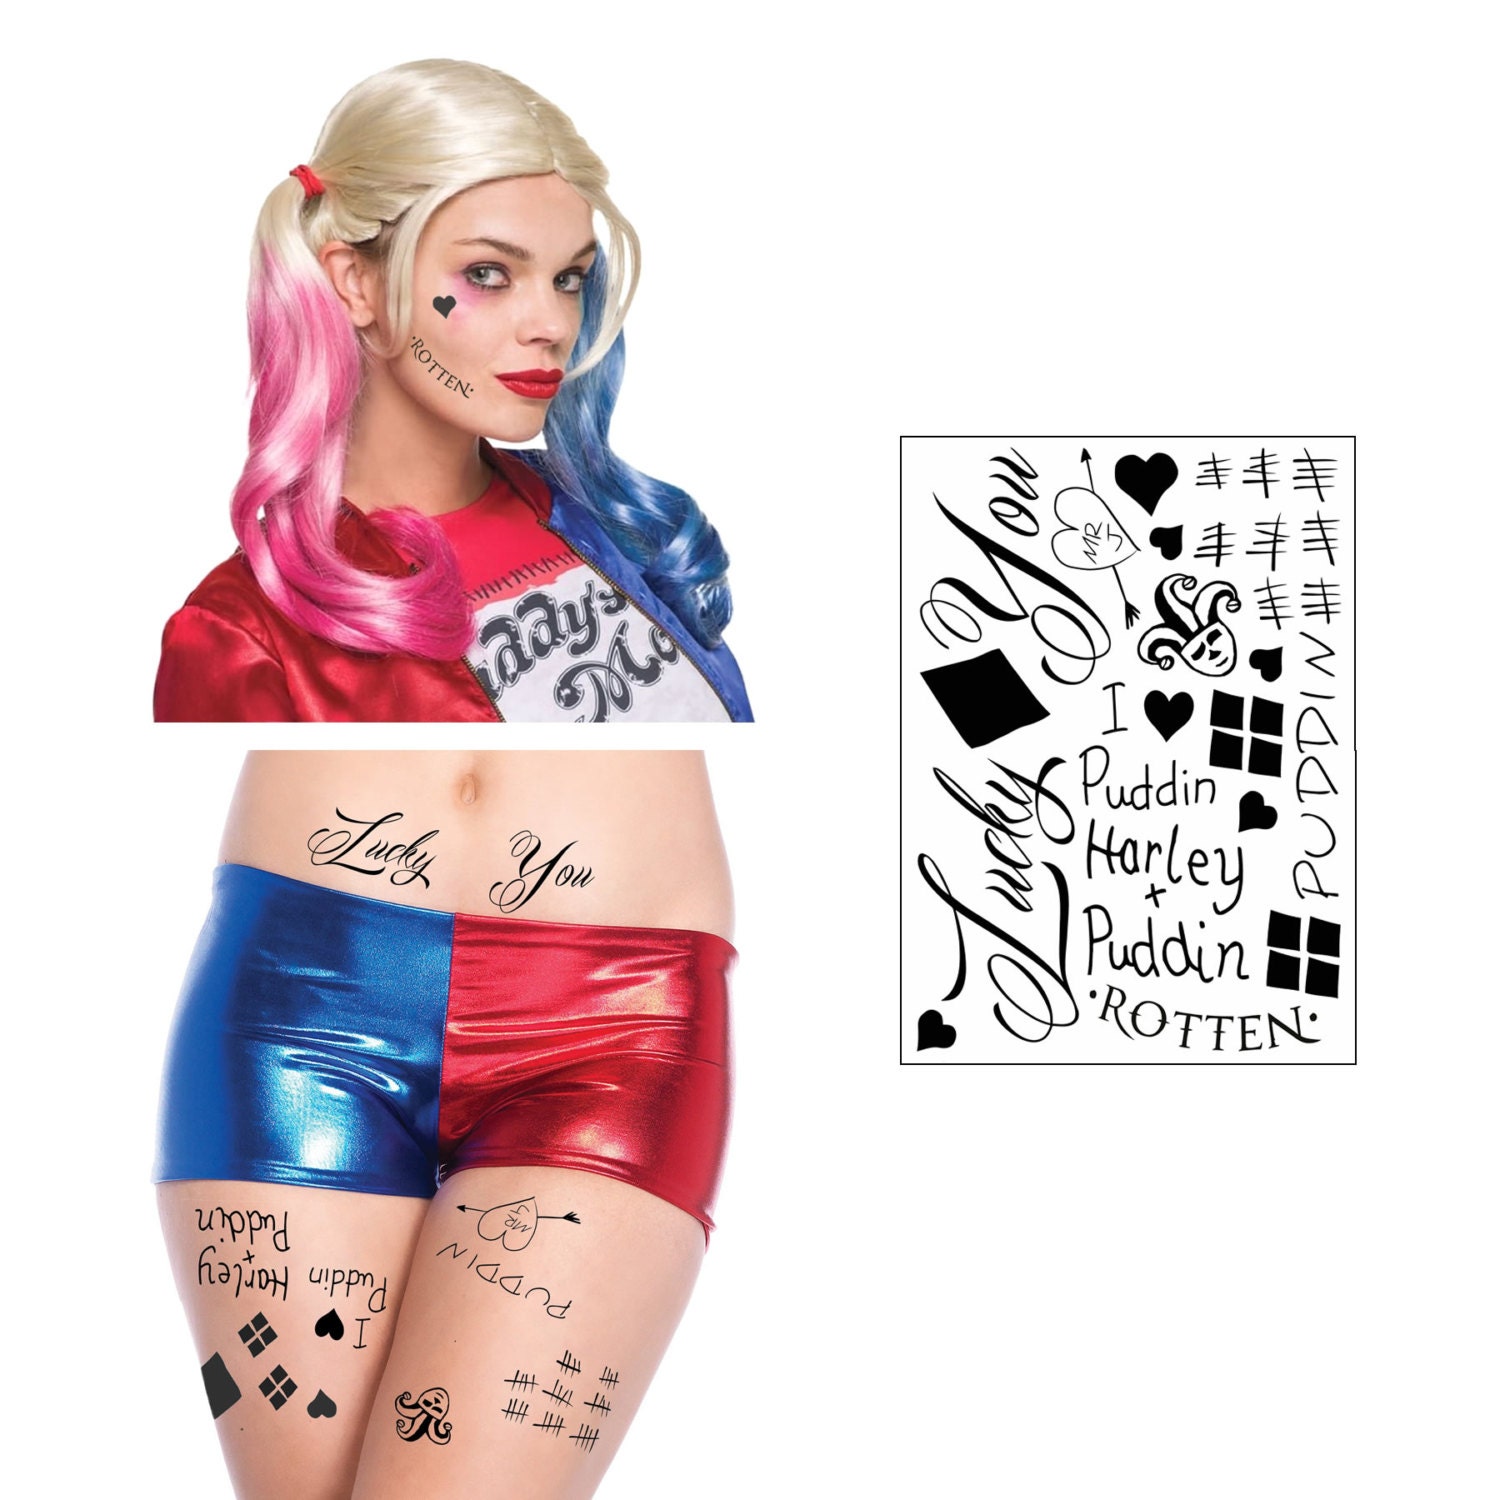 The Suicide Squad Harley Quinn Tattoo Changes